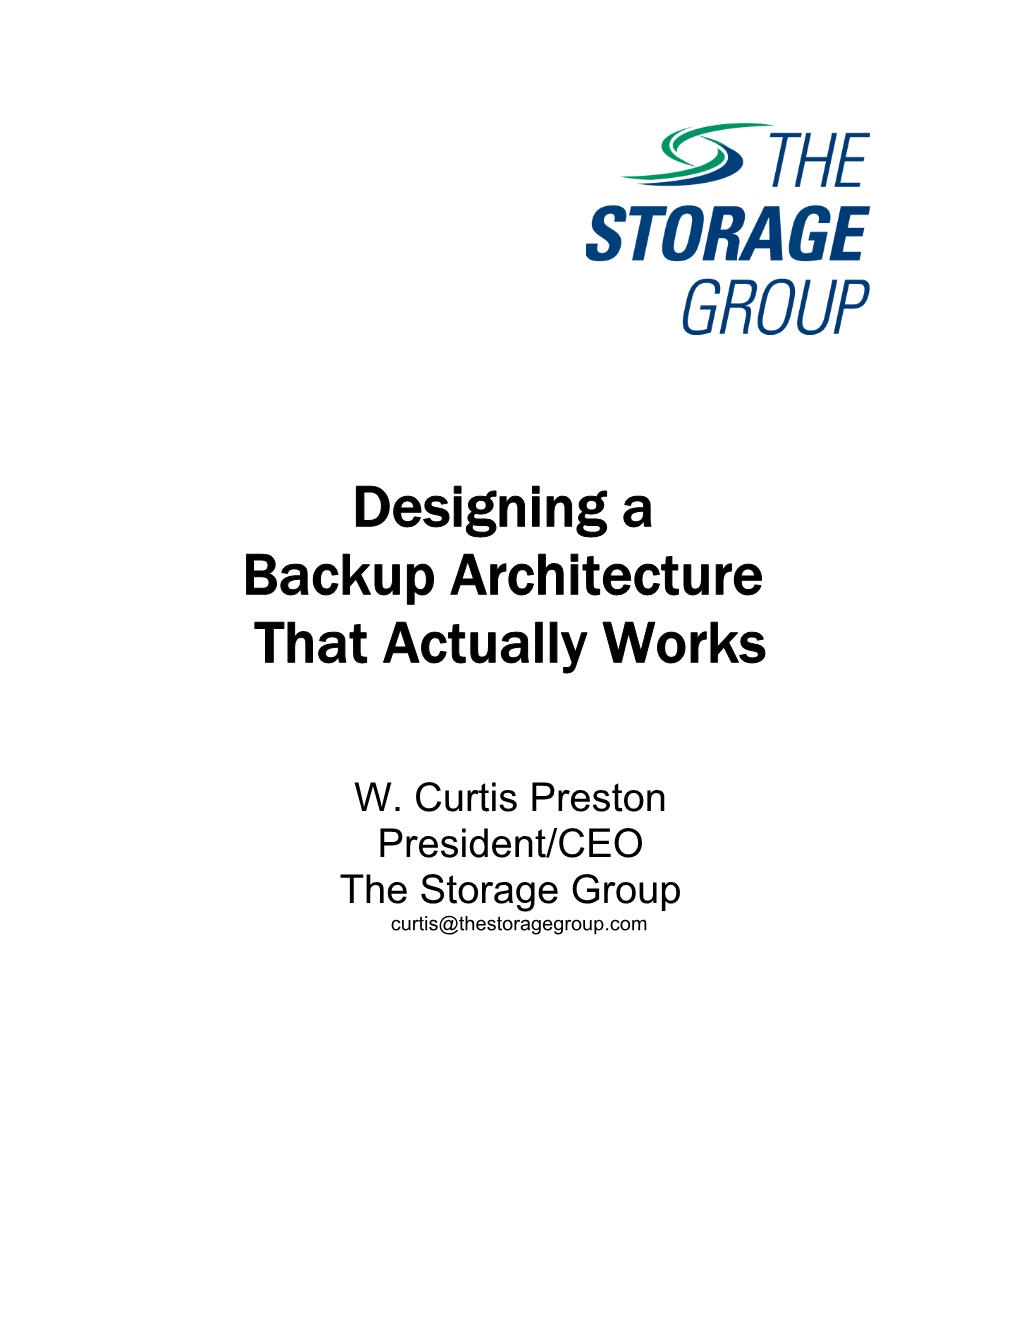 Designing a Backup Architecture That Actually Works